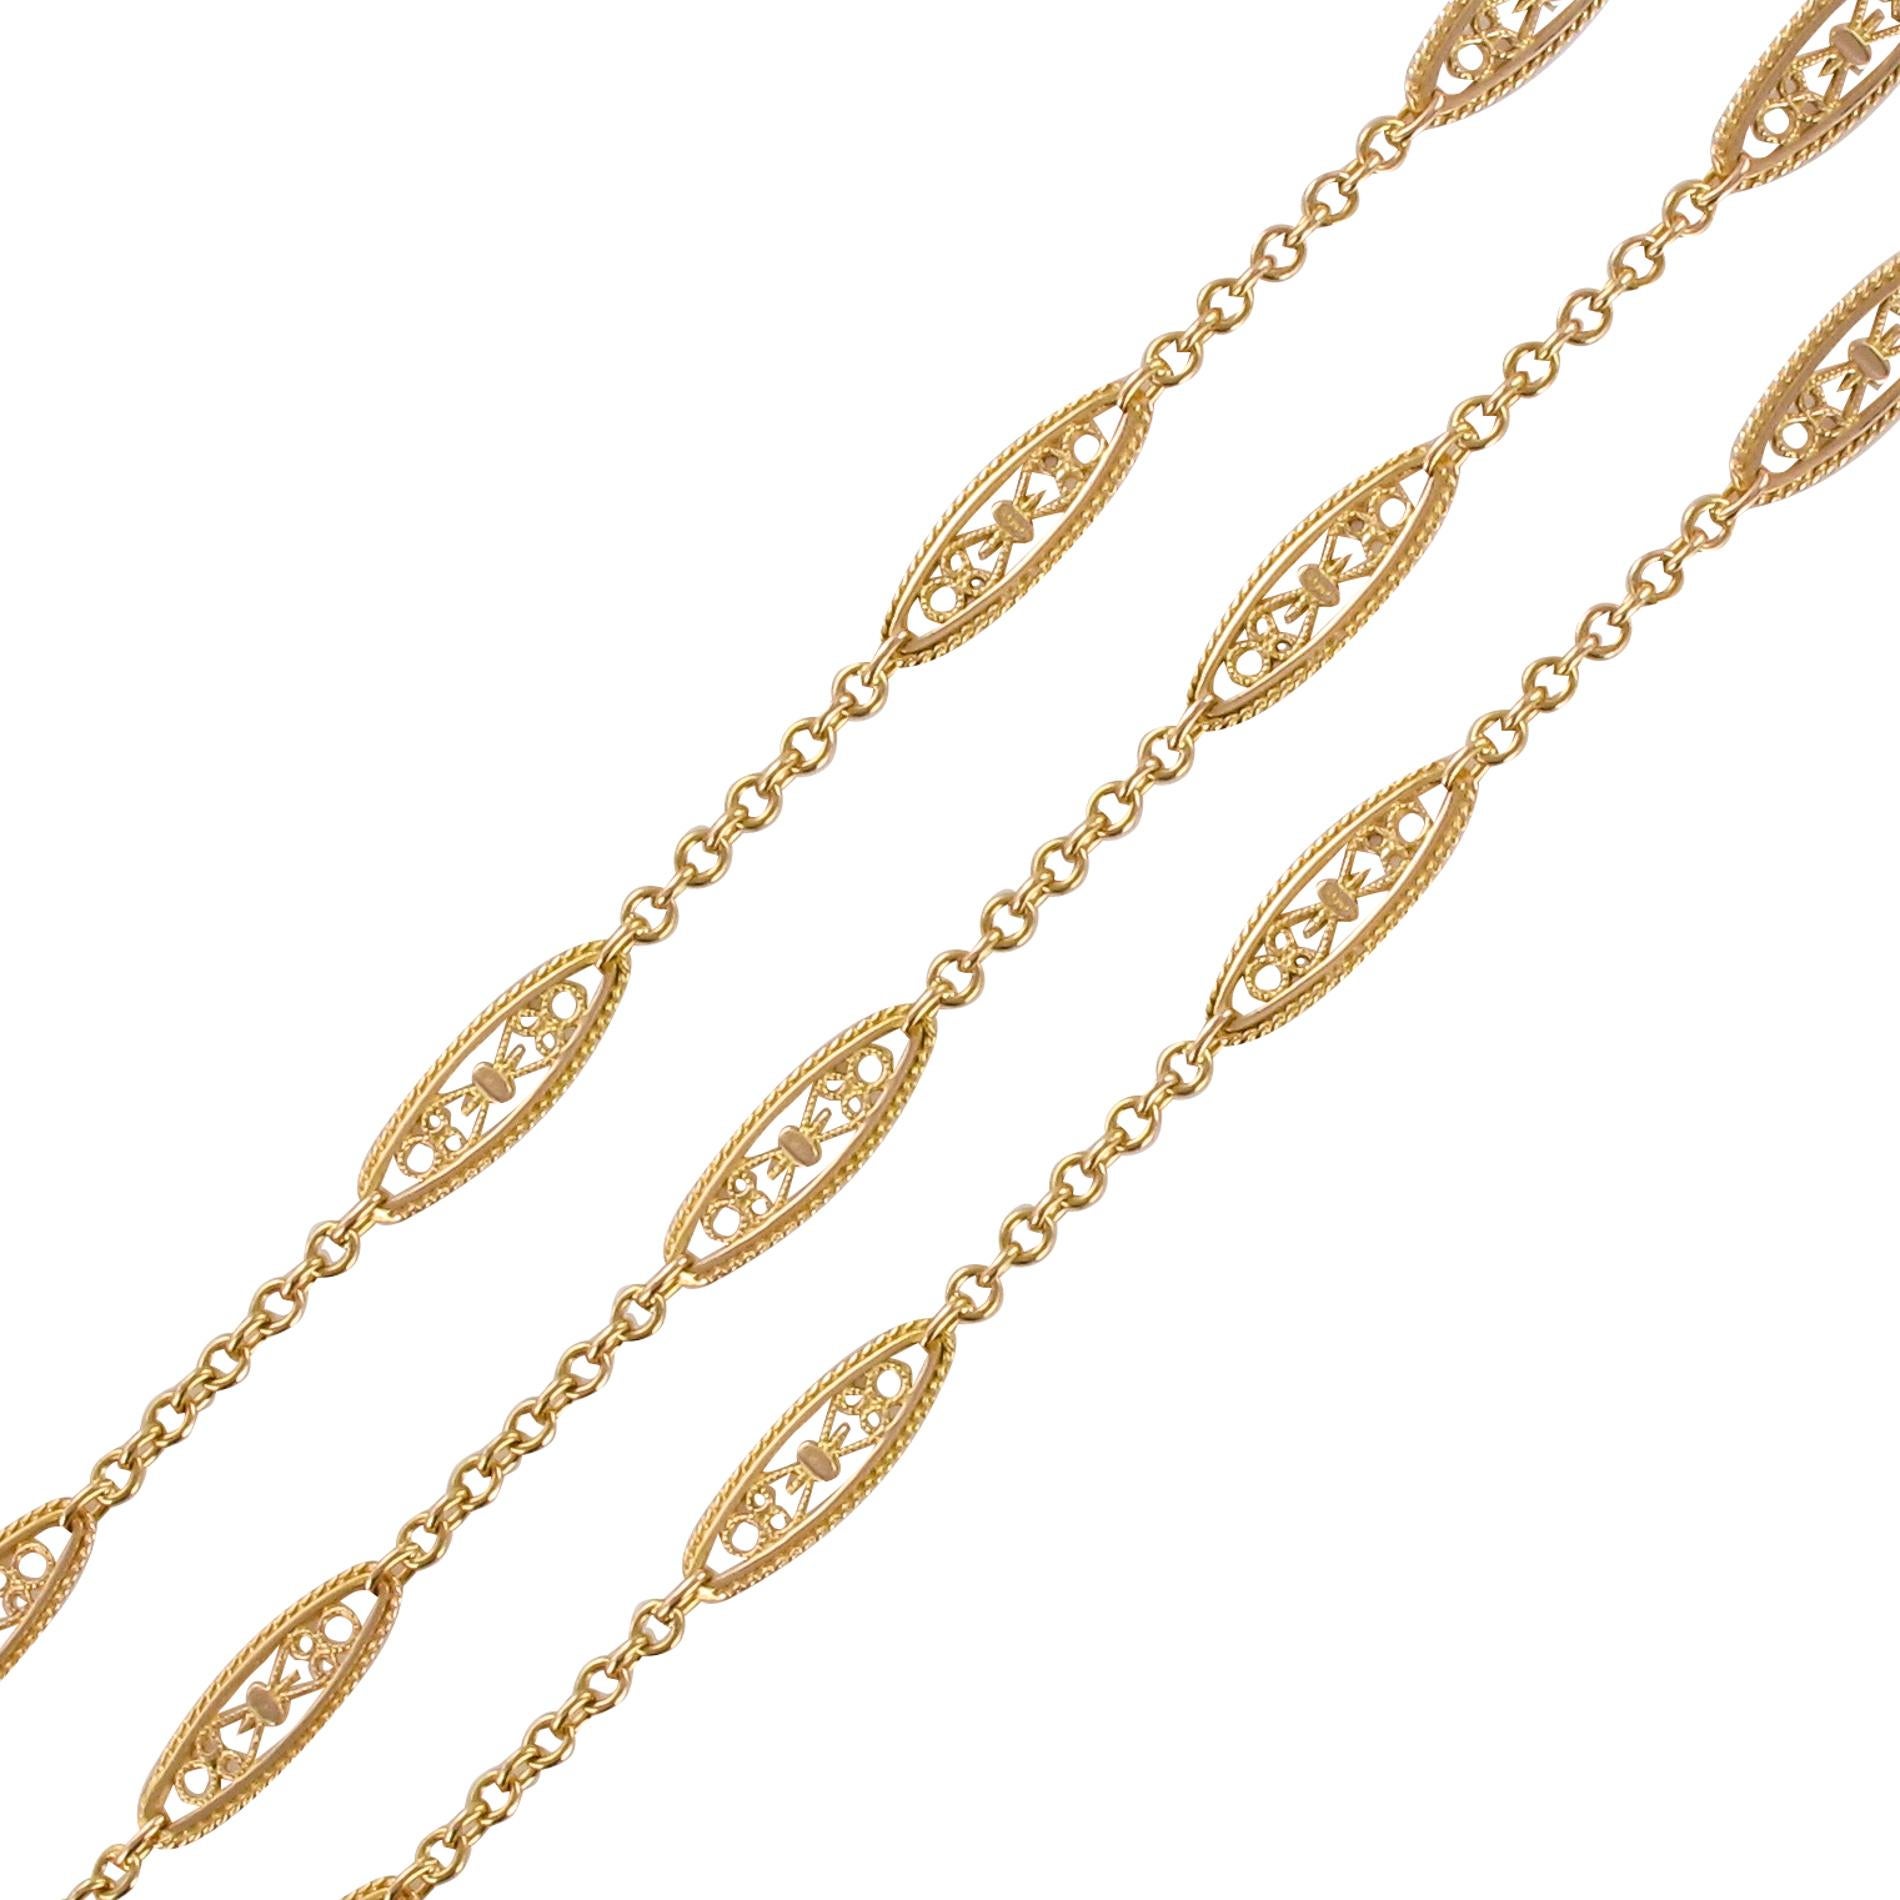 Necklace in 18 karat rose gold, eagle's head hallmark.
A delightful antique long necklace, it is made up of a jaseron chain punctuated with shuttle pattern traversed by filigrees, and each bordered by a small gold cord. The clasp is a